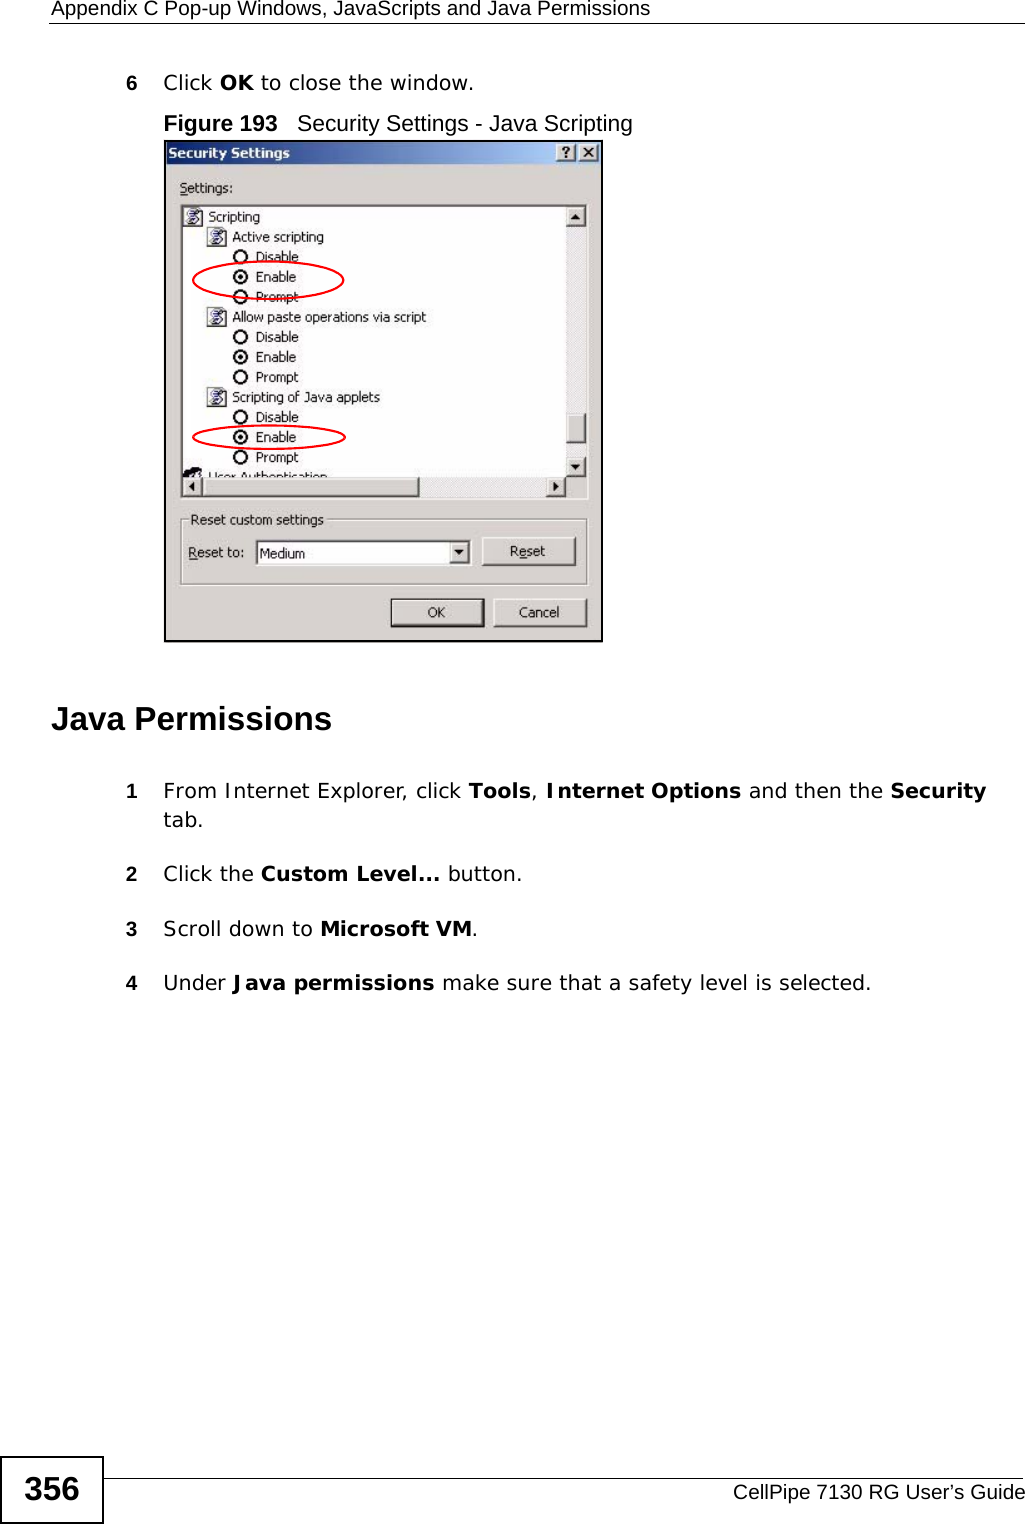 Appendix C Pop-up Windows, JavaScripts and Java PermissionsCellPipe 7130 RG User’s Guide3566Click OK to close the window.Figure 193   Security Settings - Java ScriptingJava Permissions1From Internet Explorer, click Tools, Internet Options and then the Security tab. 2Click the Custom Level... button. 3Scroll down to Microsoft VM. 4Under Java permissions make sure that a safety level is selected.